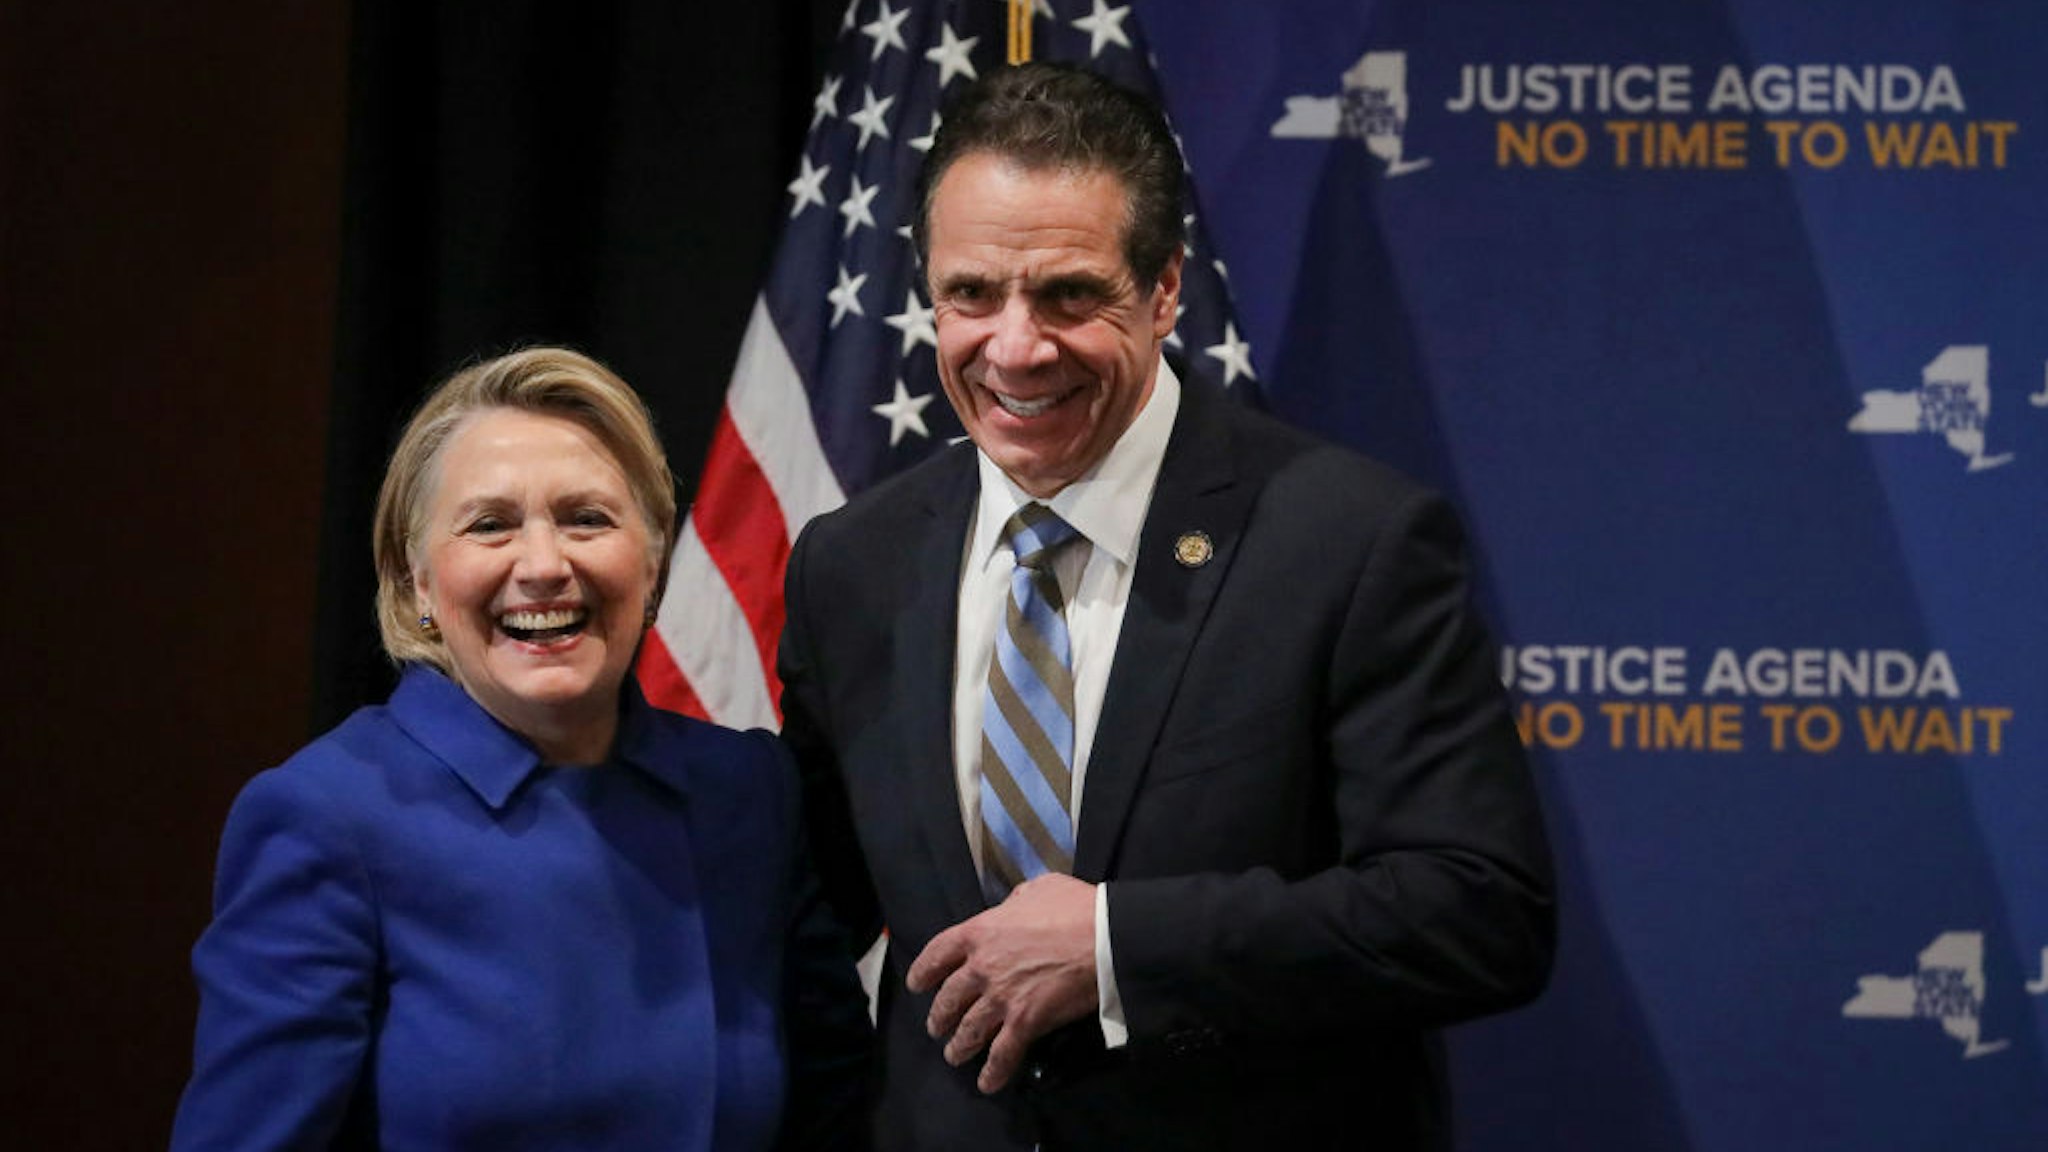 Former Secretary of State Hillary Clinton and New York Governor Andrew Cuomo smile at the end of an event to discuss reproductive rights at Barnard College, January 7, 2019 in New York City.